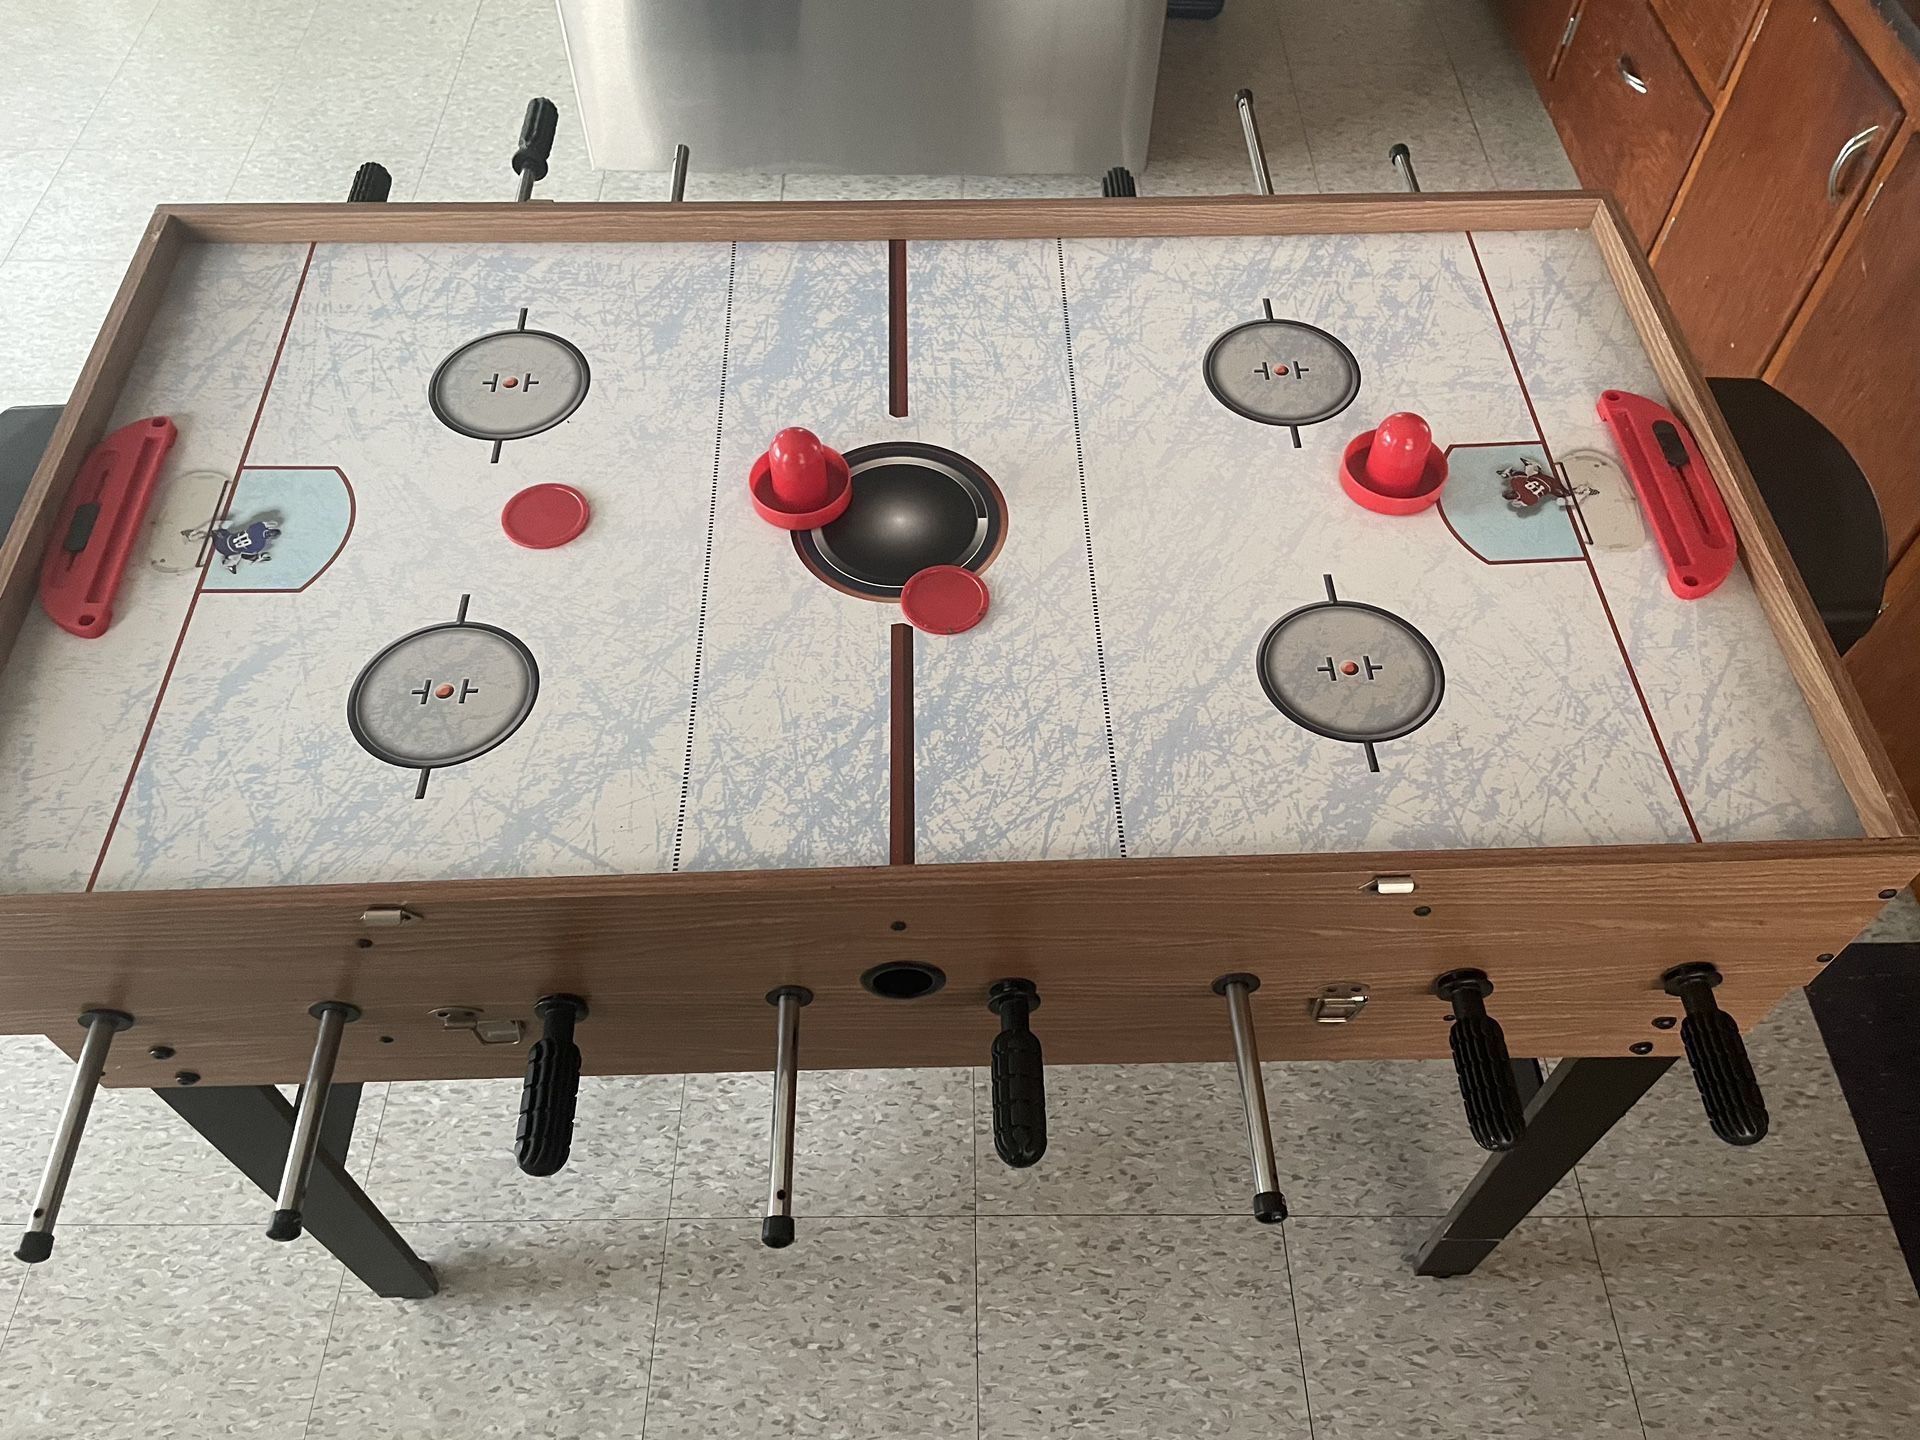 MD Sports 48 Inch 3-In-1 Combo Game Table Air Powered Hockey Foosball Billiards 